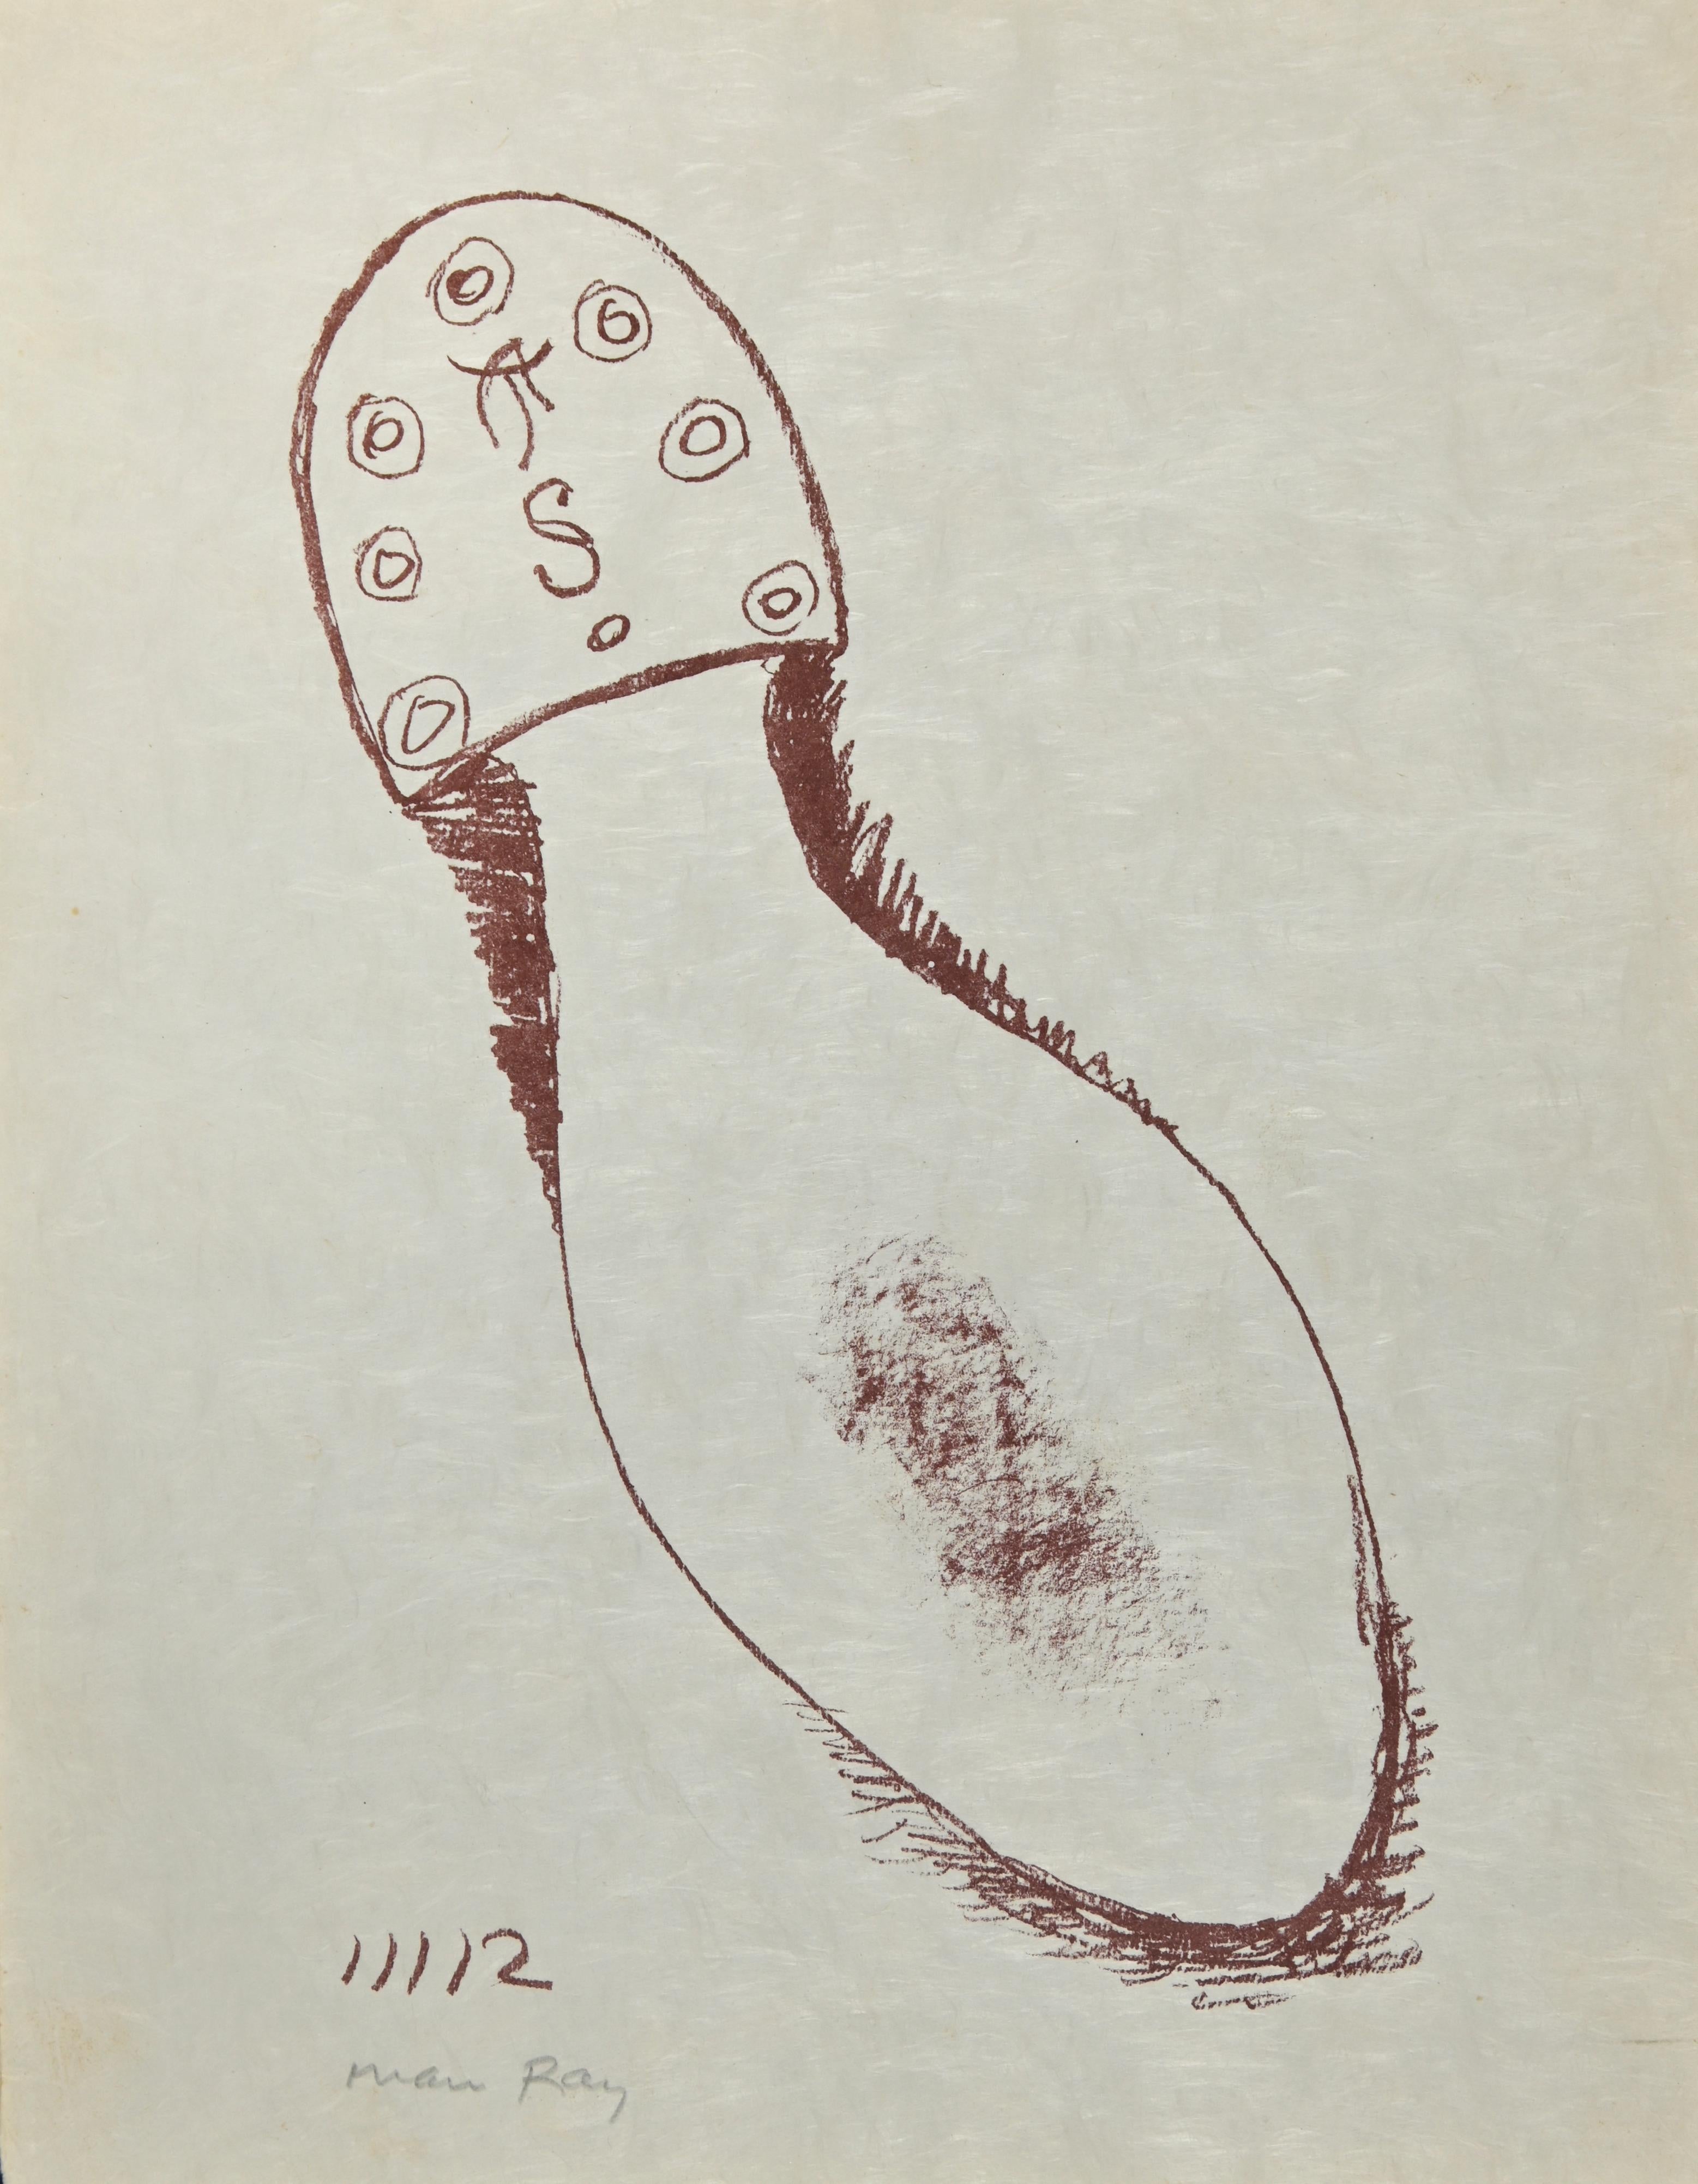 Das Absolute Reale – Lithographie von Man Ray – 1964